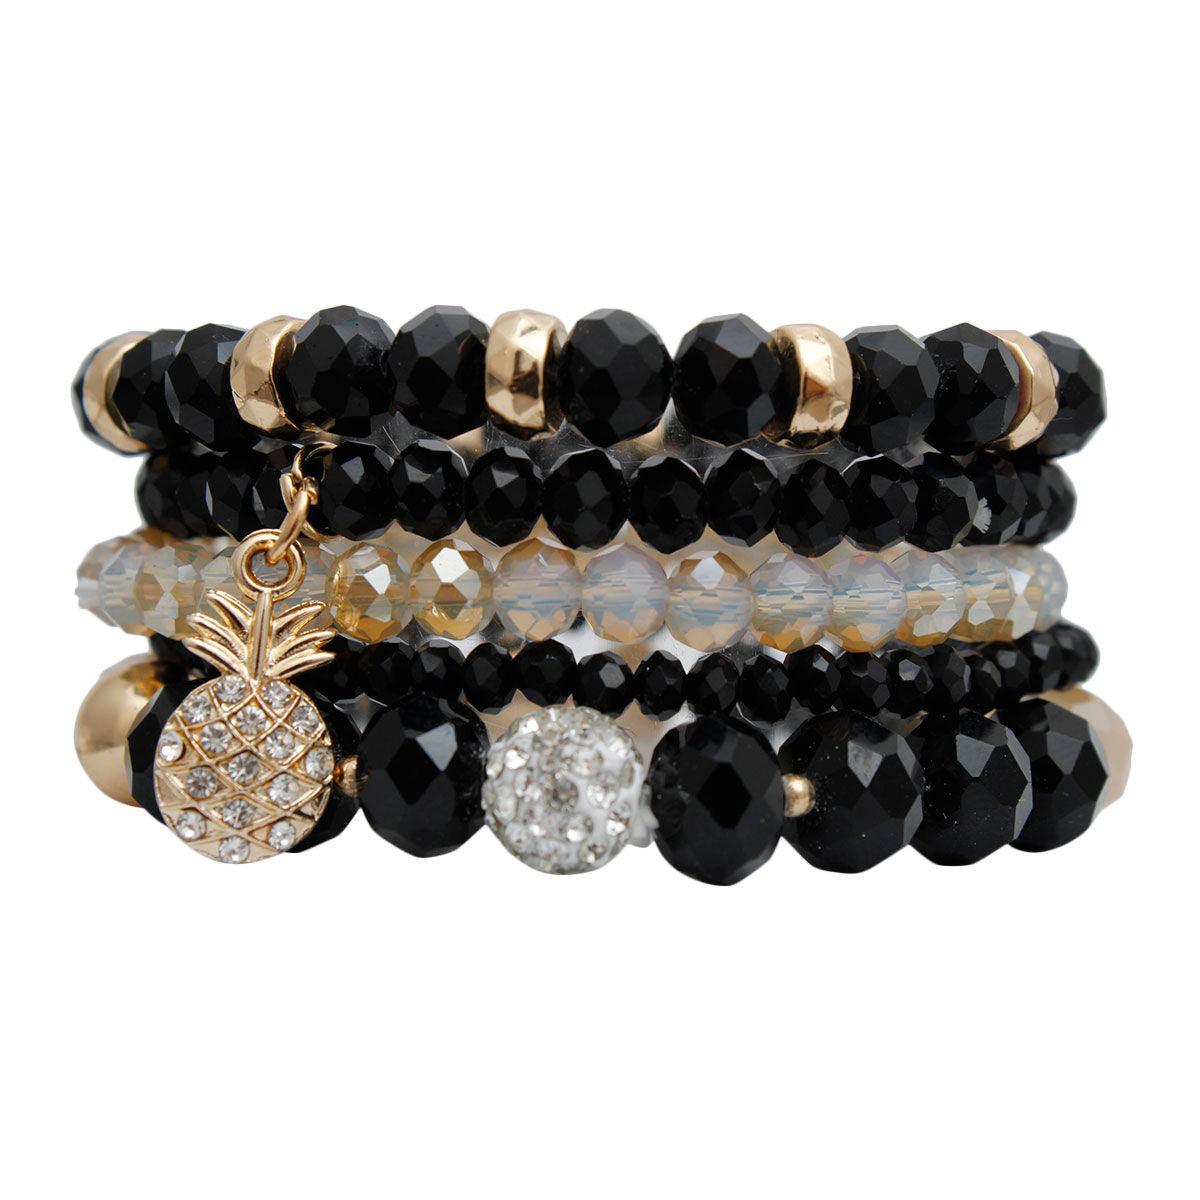 Black and Gold Bead Stretch Bracelet Set with Pineapple Charm